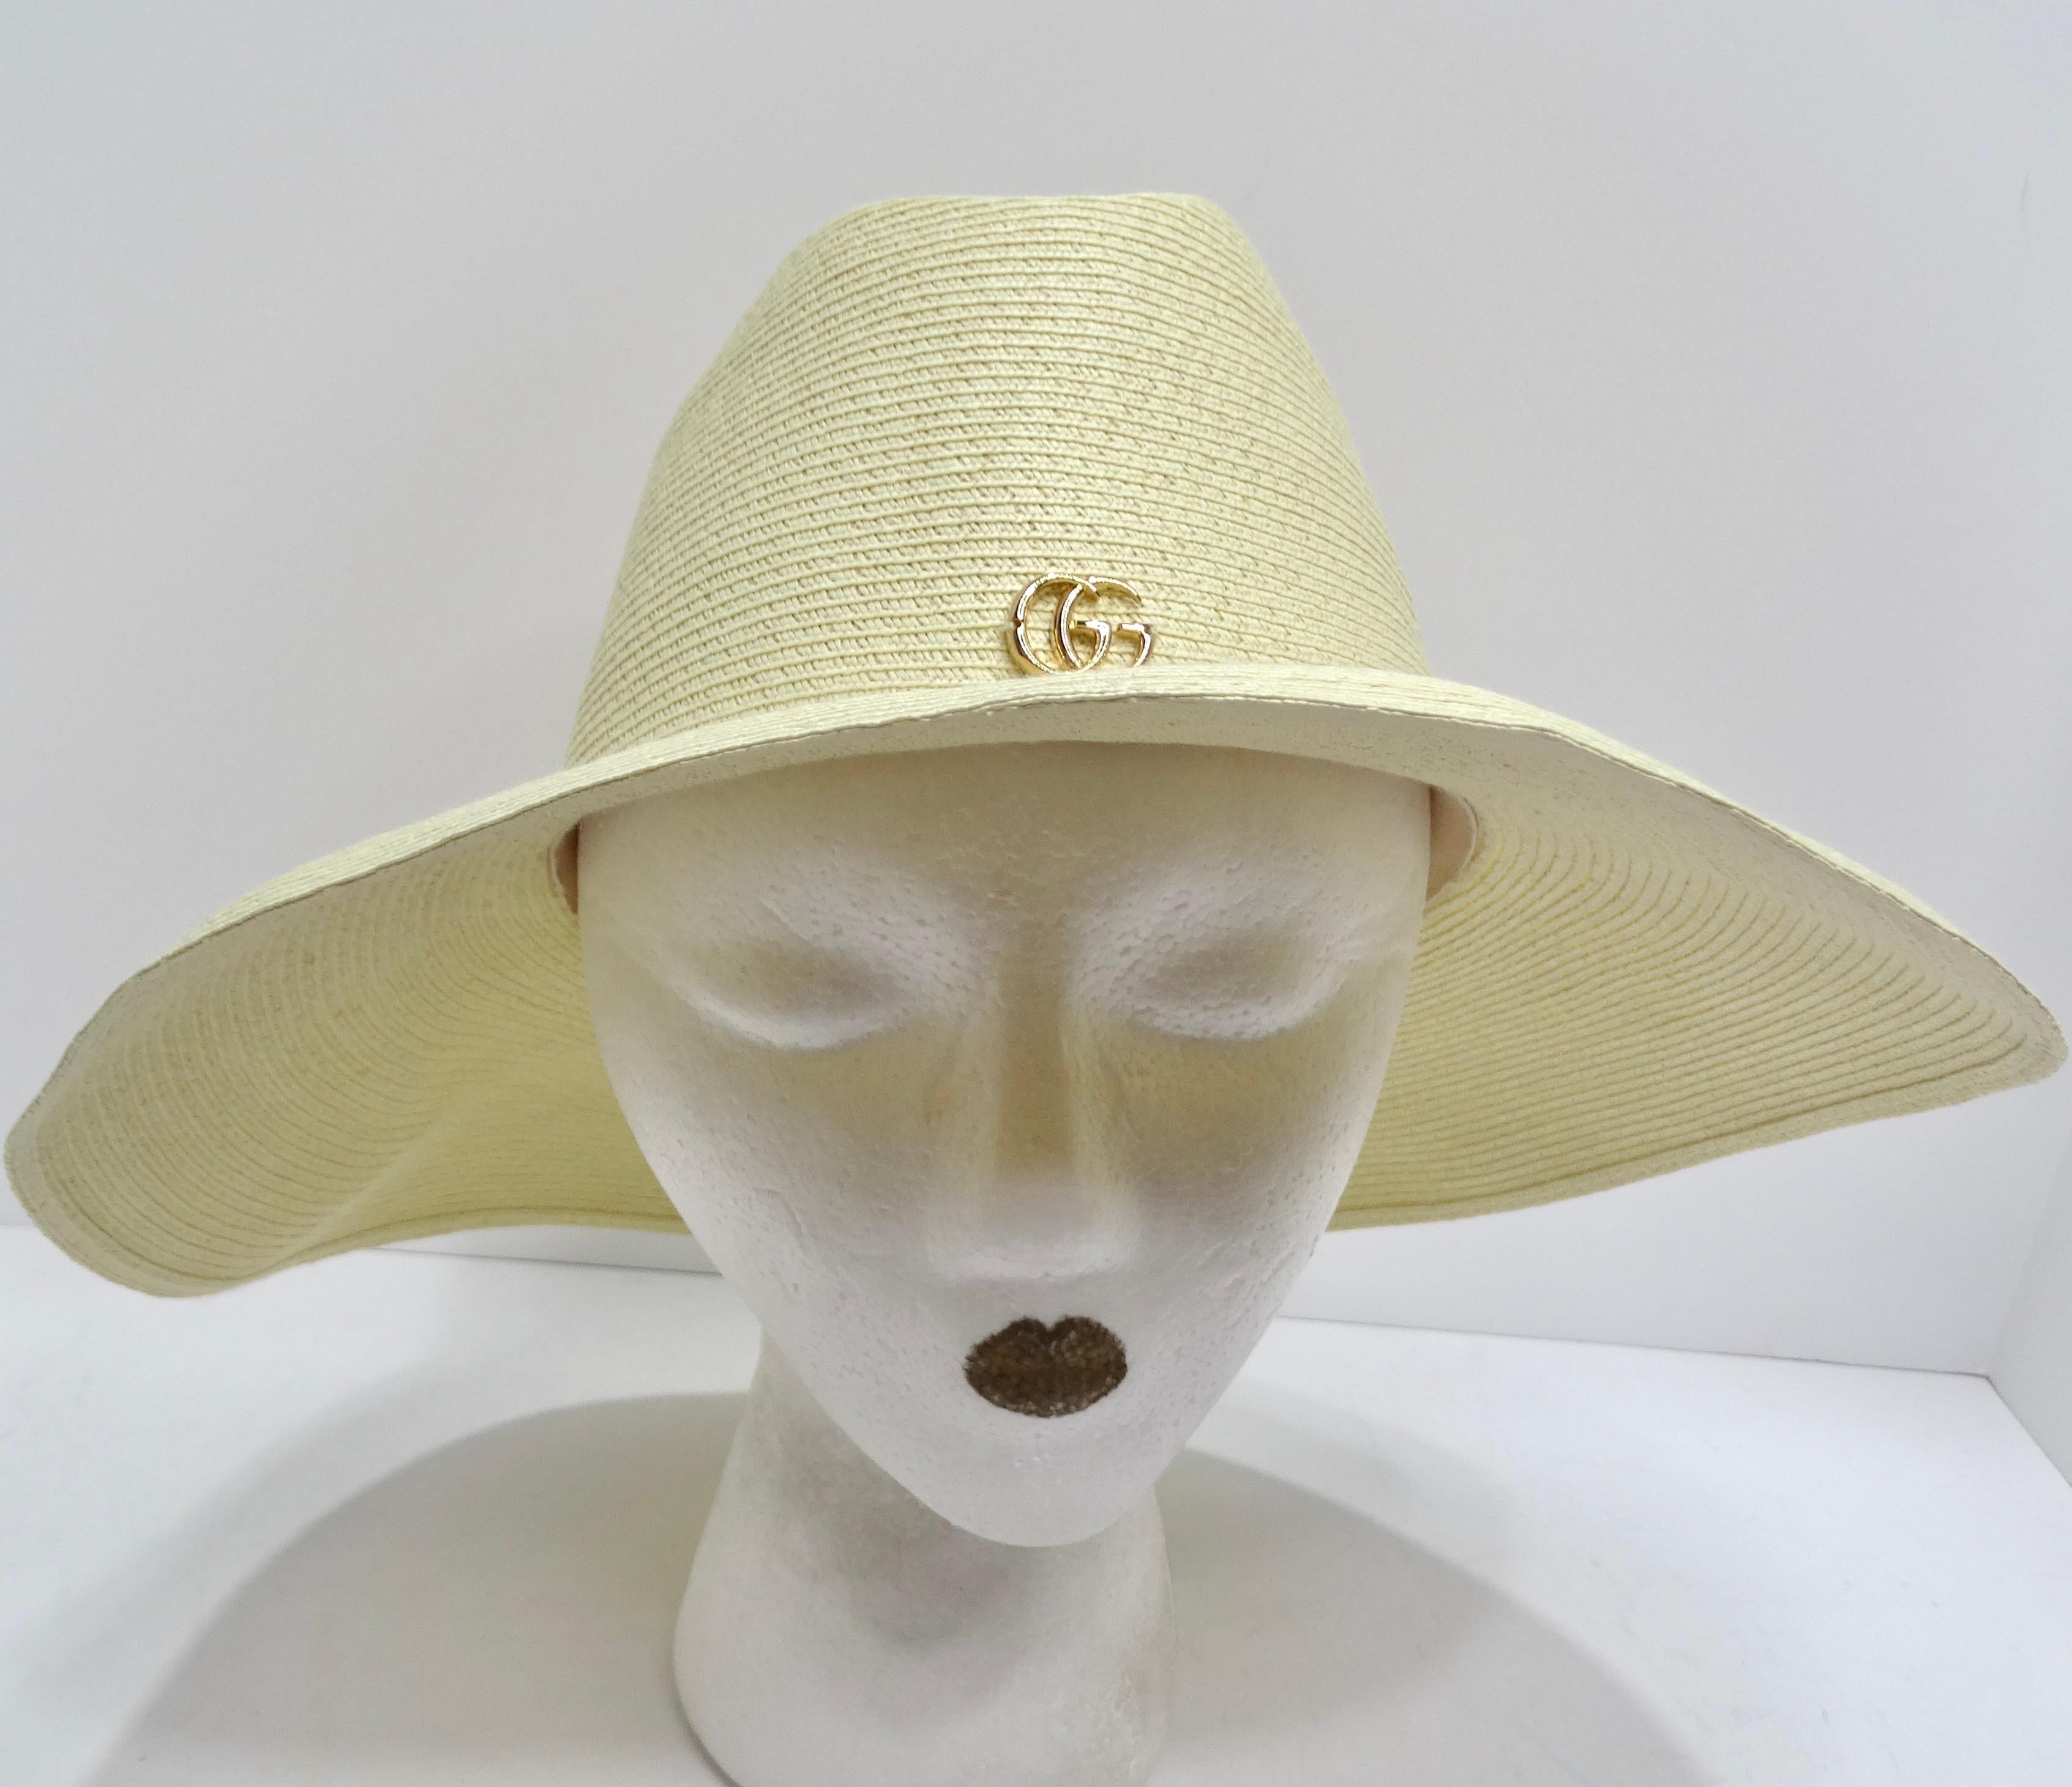 Introducing the Gucci Papier Wide Brim Hat – the epitome of chic and luxury for those sunny days. Crafted from ivory raffia straw and adorned with a gleaming gold Gucci logo, this hat is more than just sun protection; it's a fashion statement. The